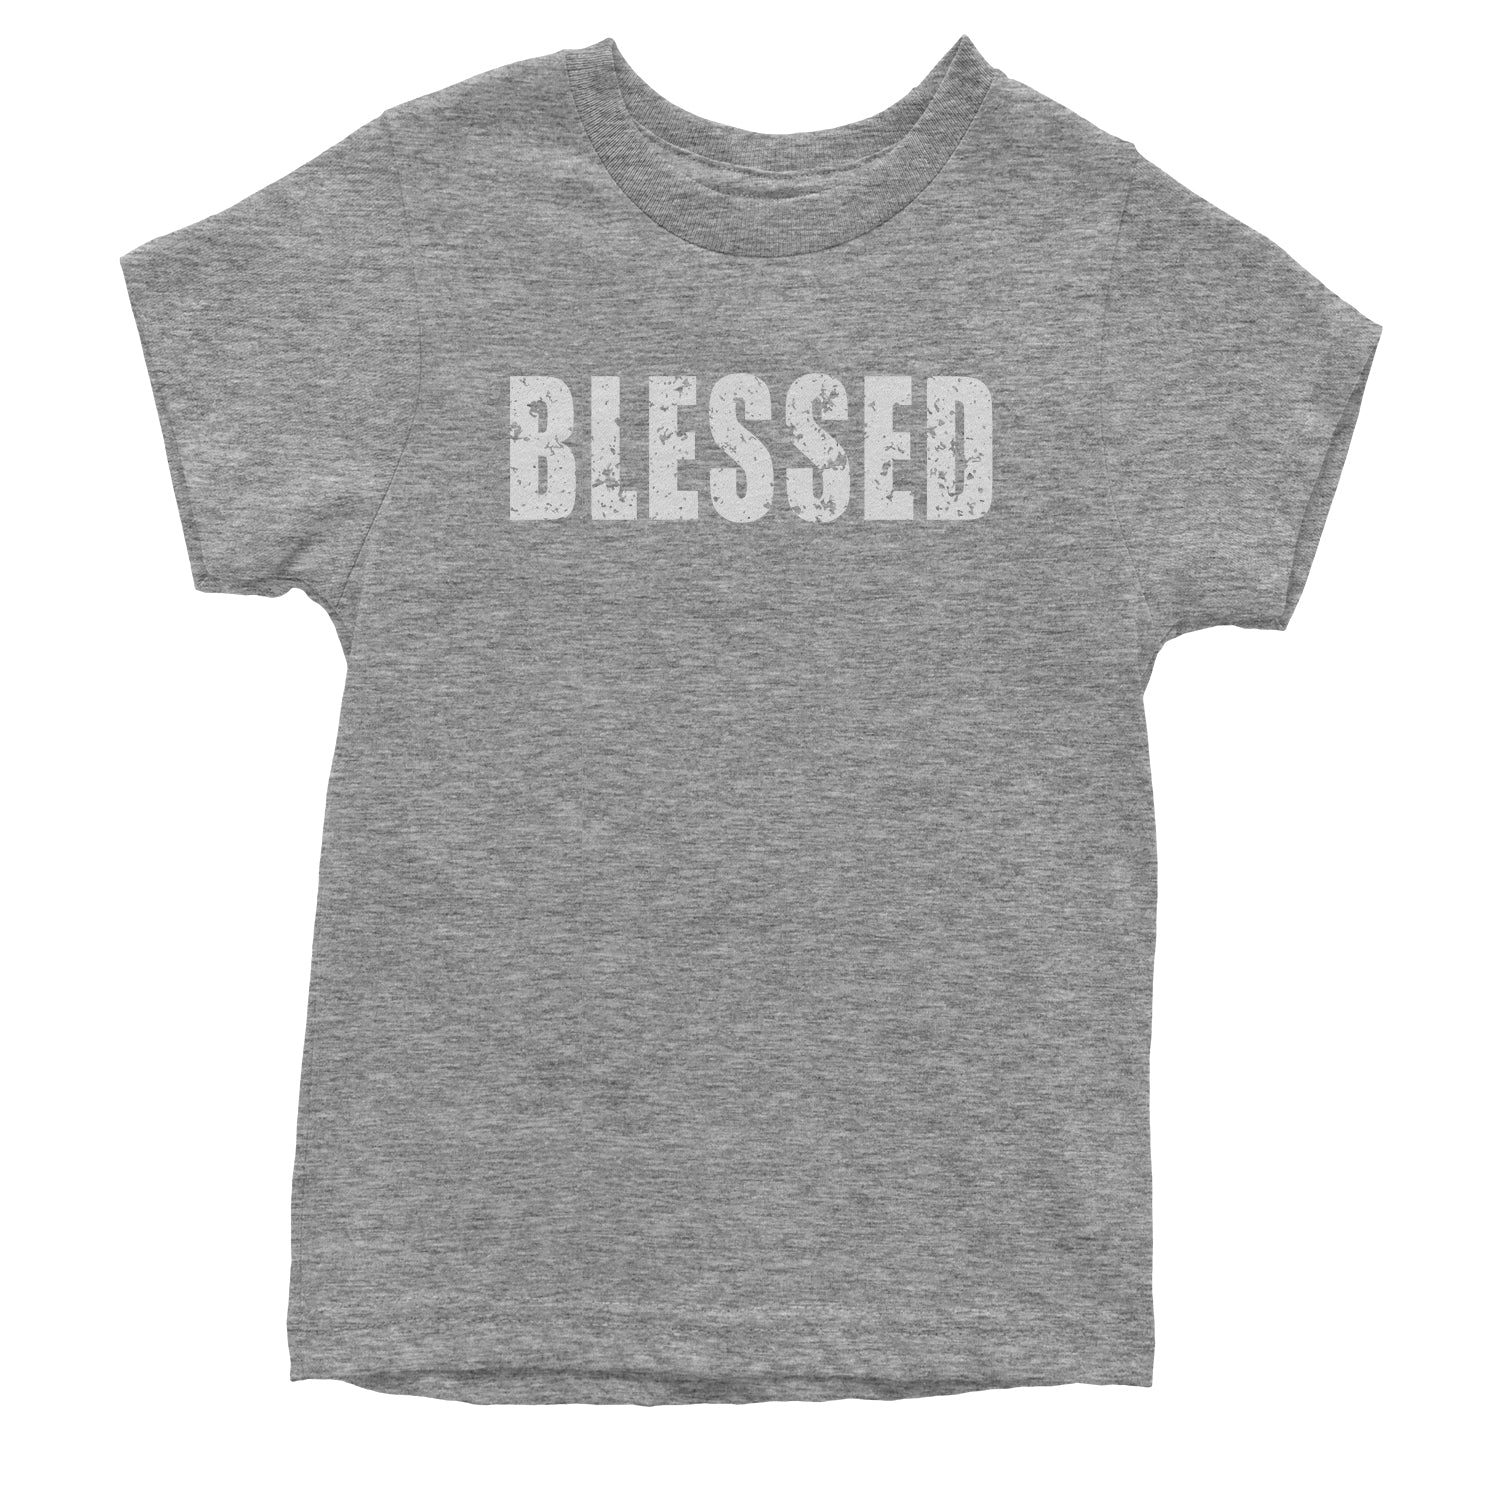 Blessed Religious Grateful Thankful Youth T-shirt #expressiontees by Expression Tees